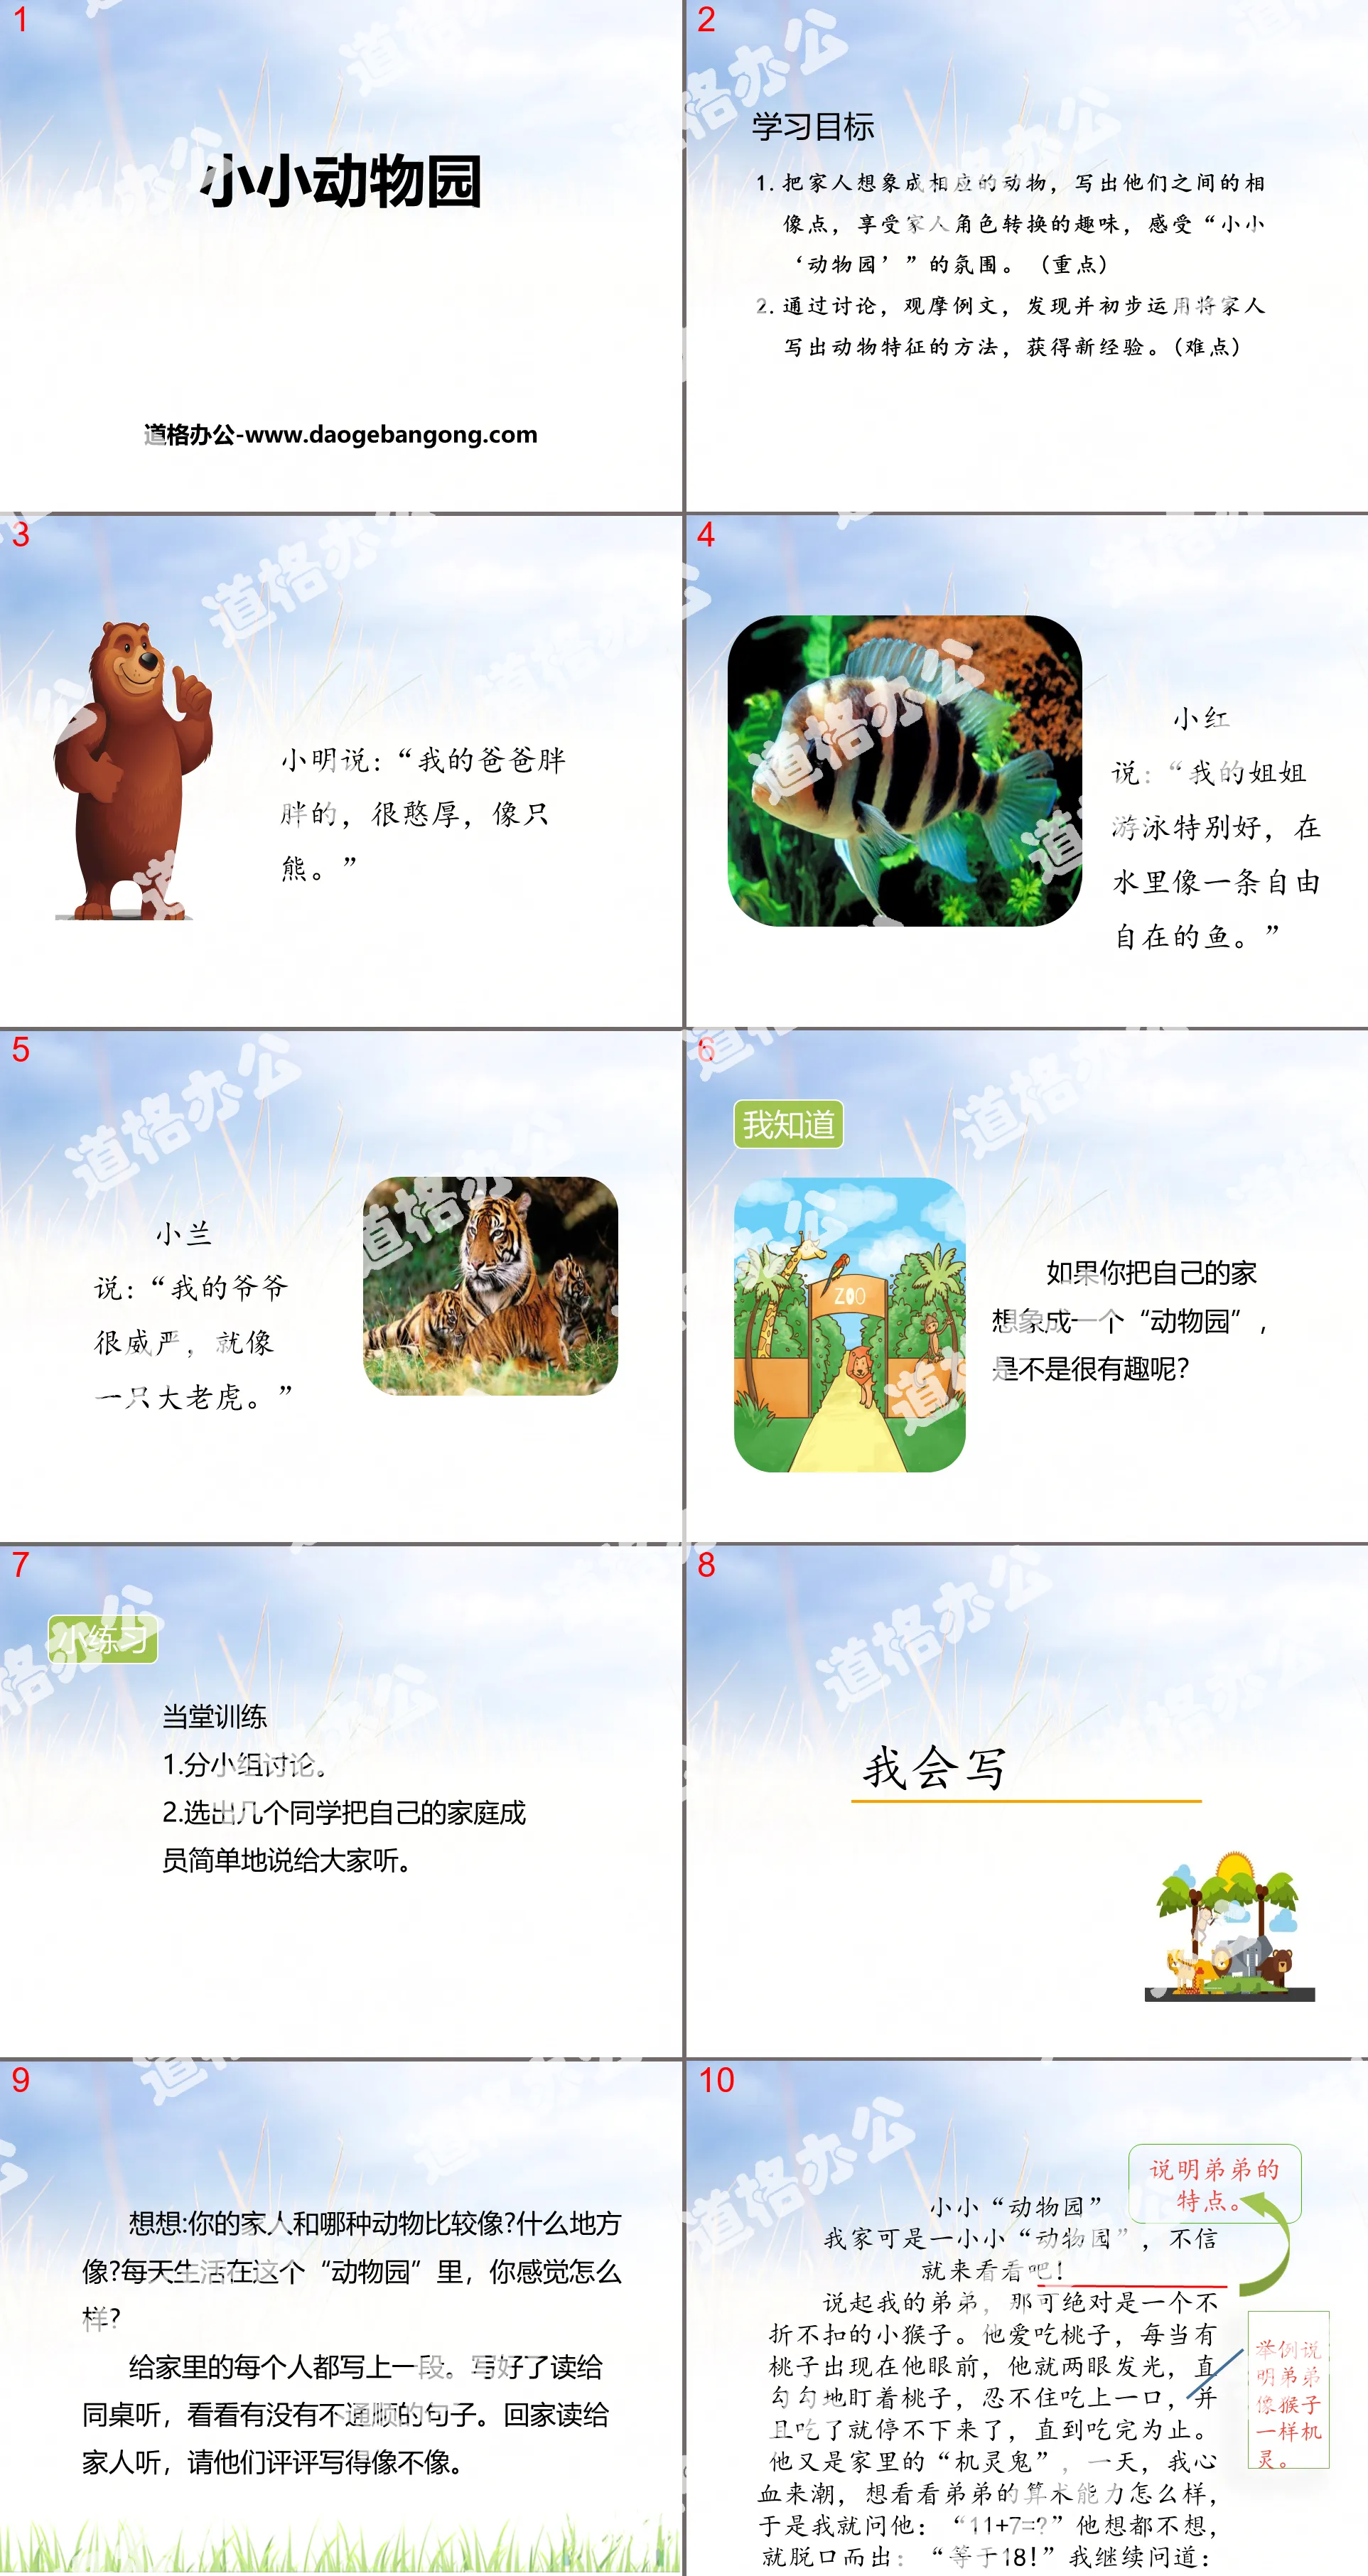 "Little Zoo" PPT download